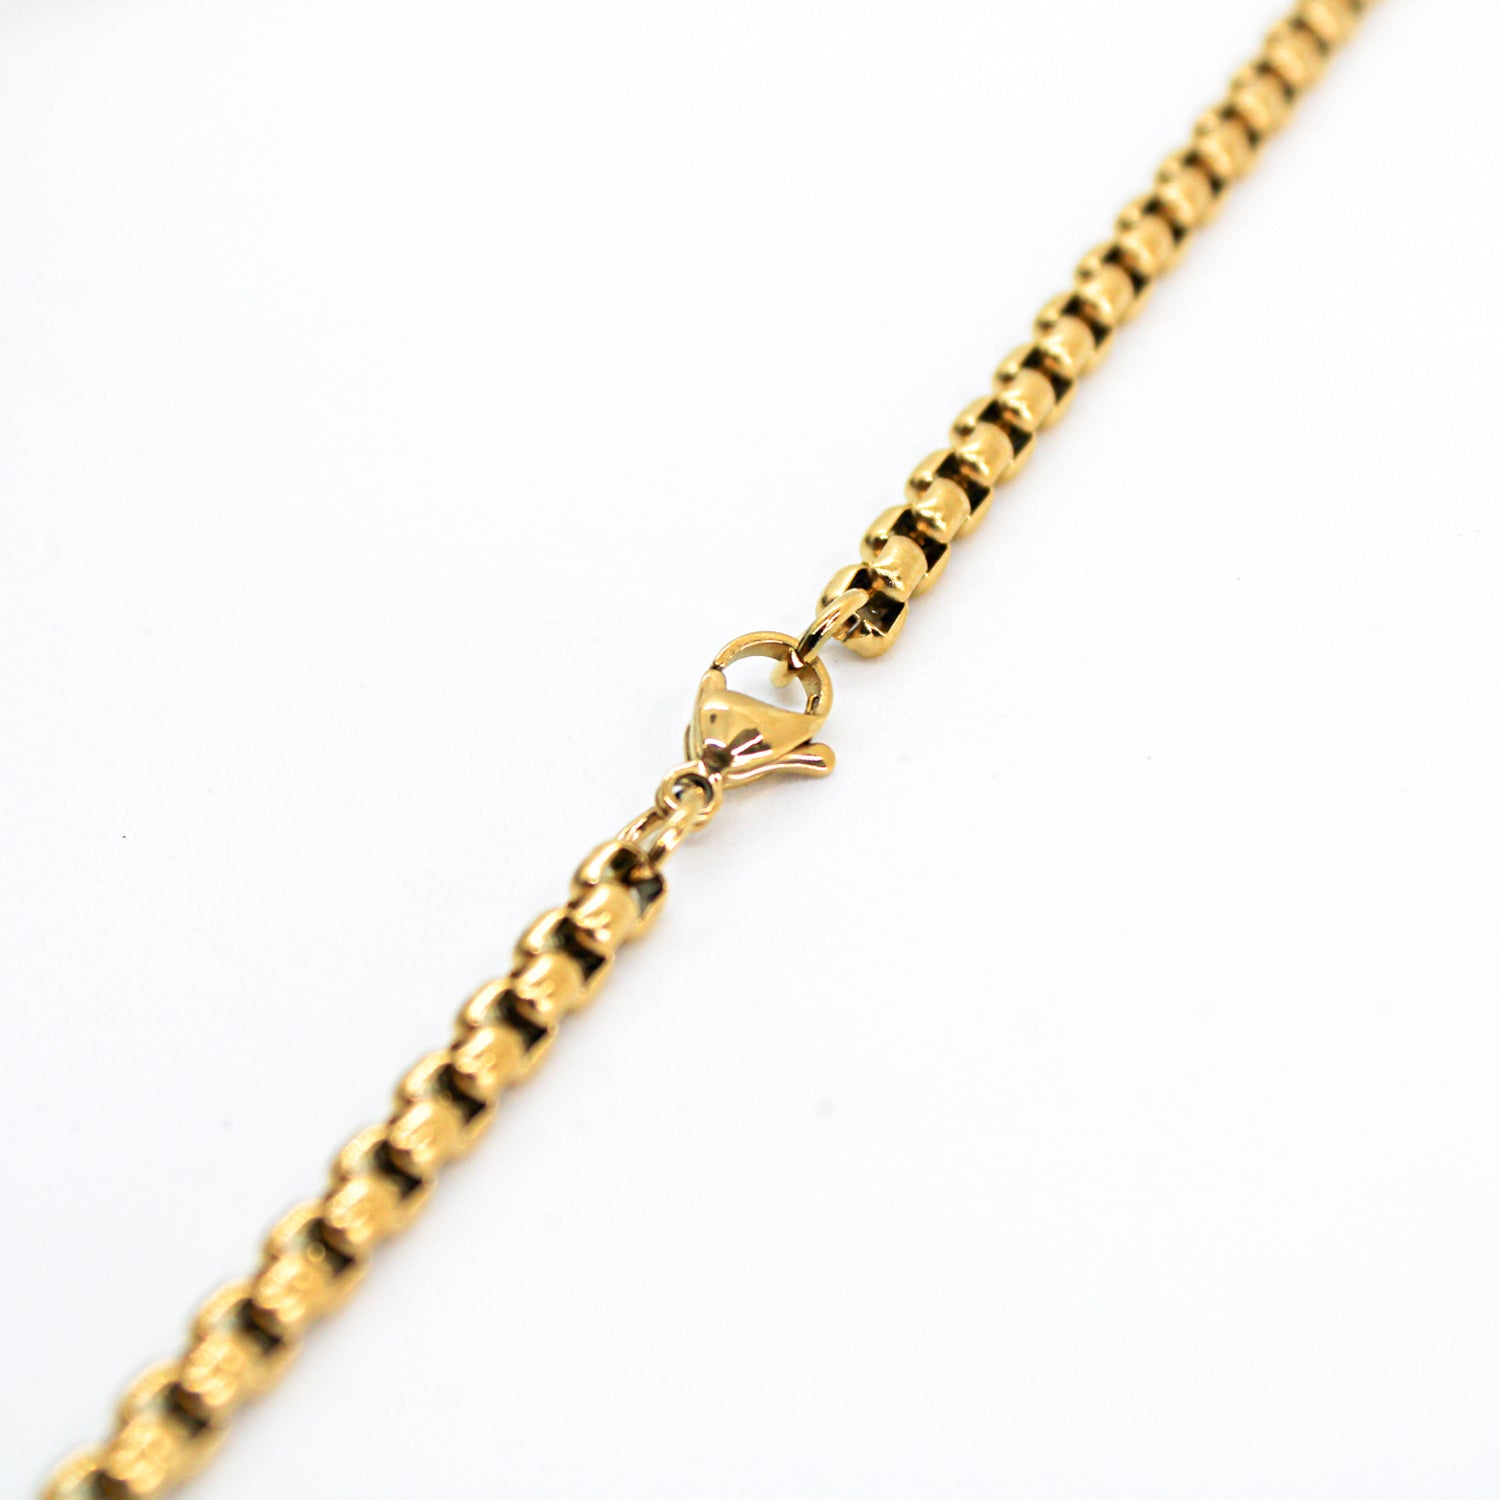 Bloomingdale's 14K Yellow Gold Tiger Pendant Necklace, 18